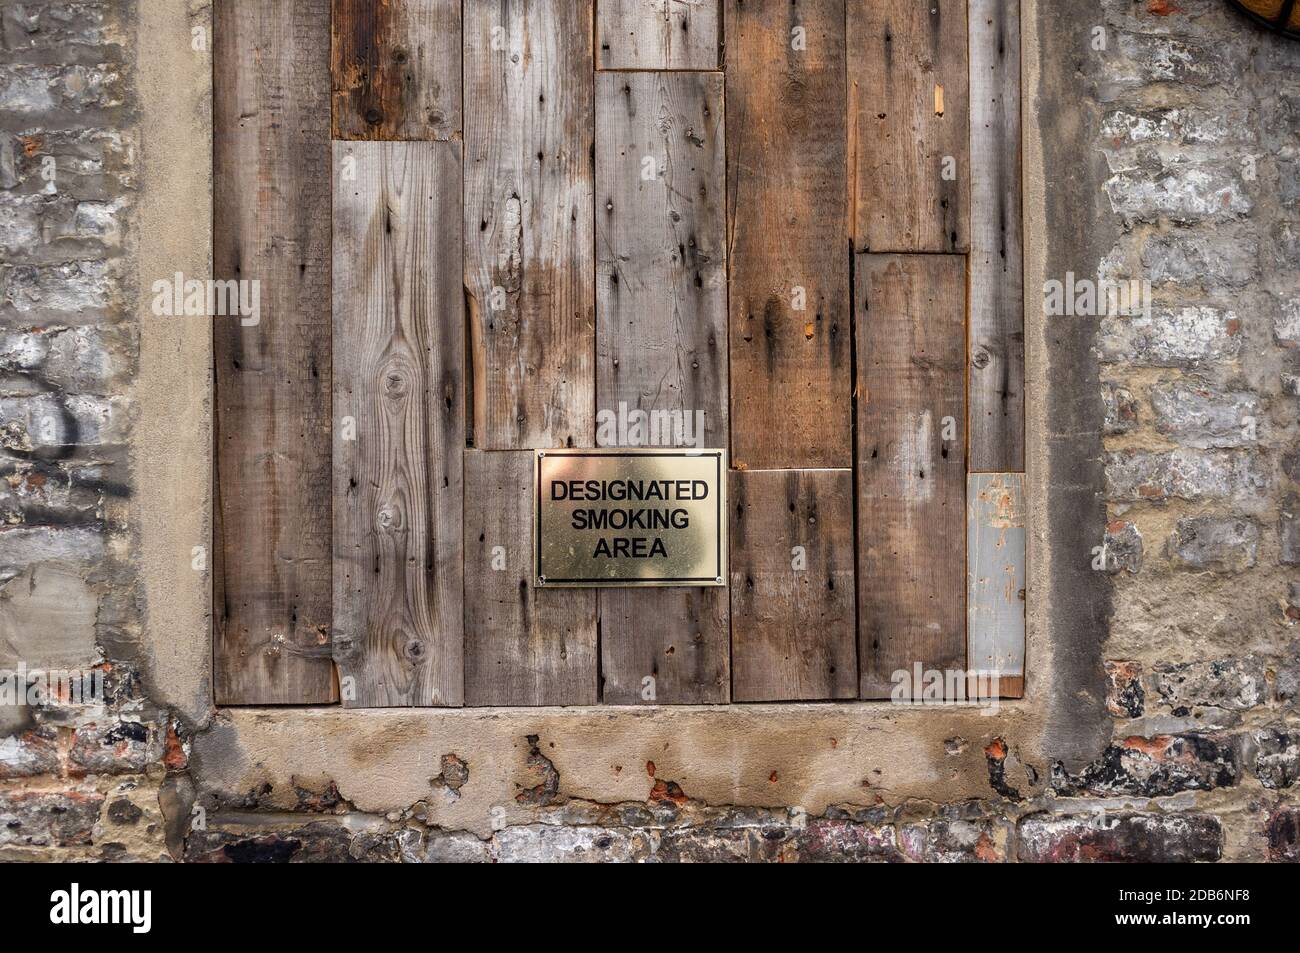 Designated Smoking Area sign mounted on a boarded up window Stock Photo